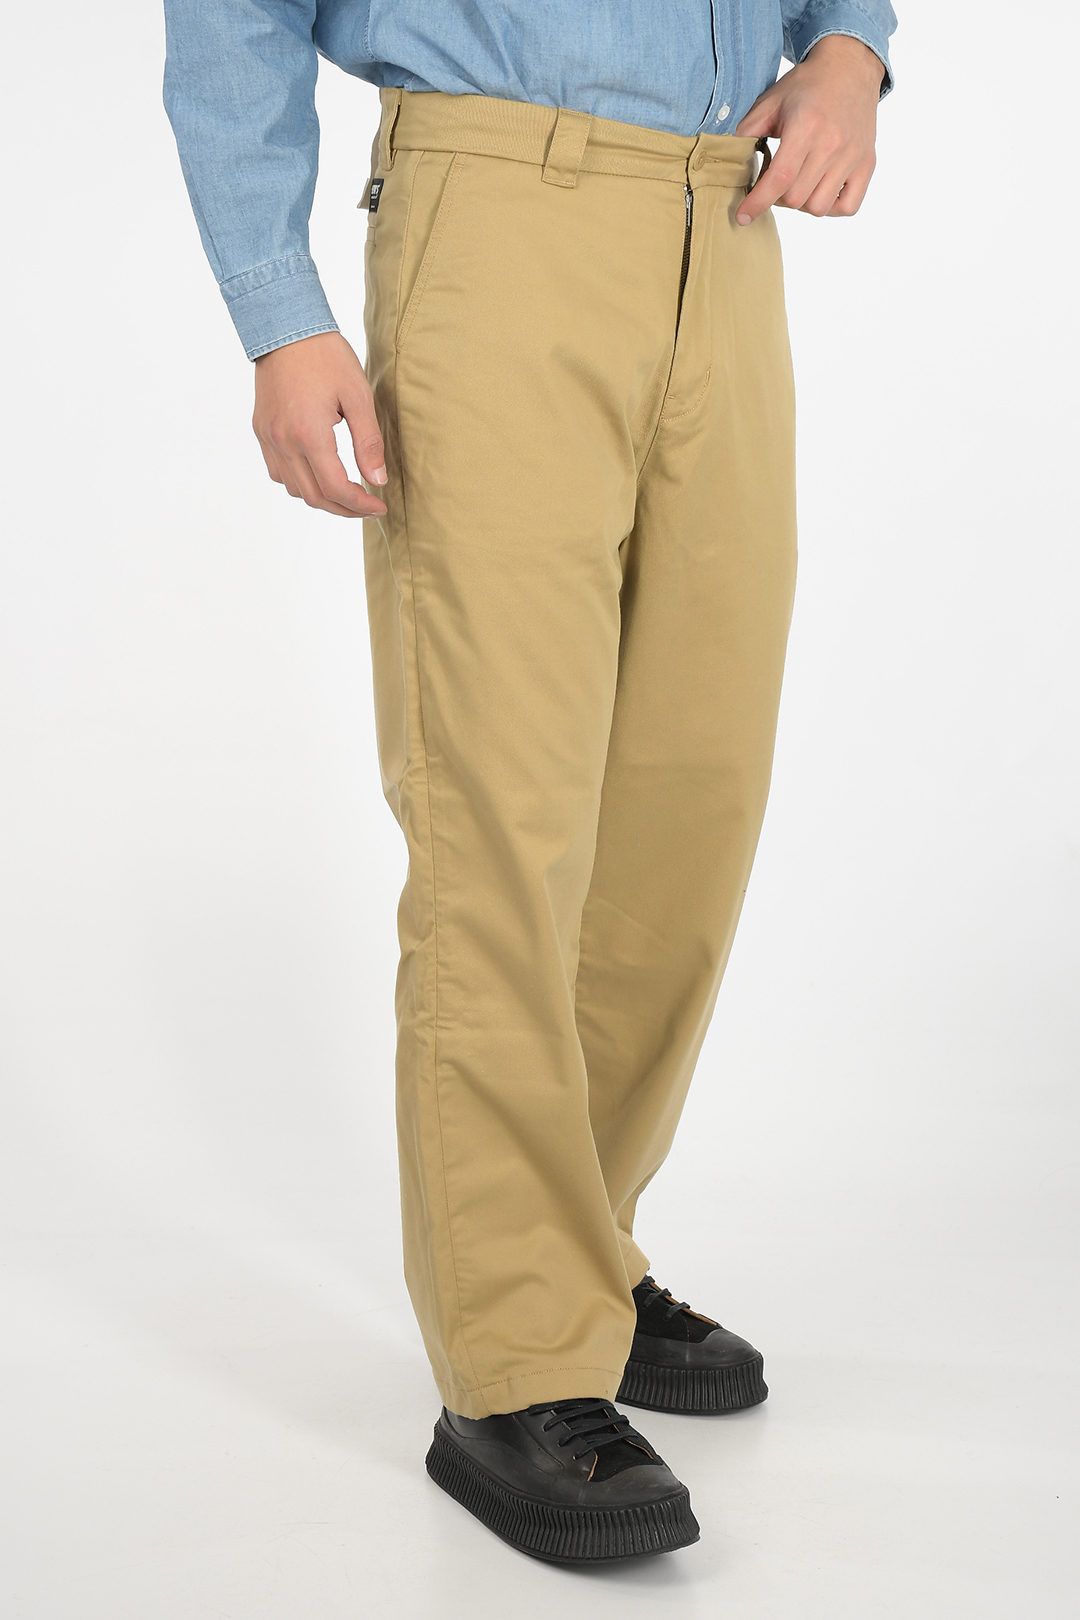 Buy Black Relaxed Fit Stretch Chino Trousers from Next India